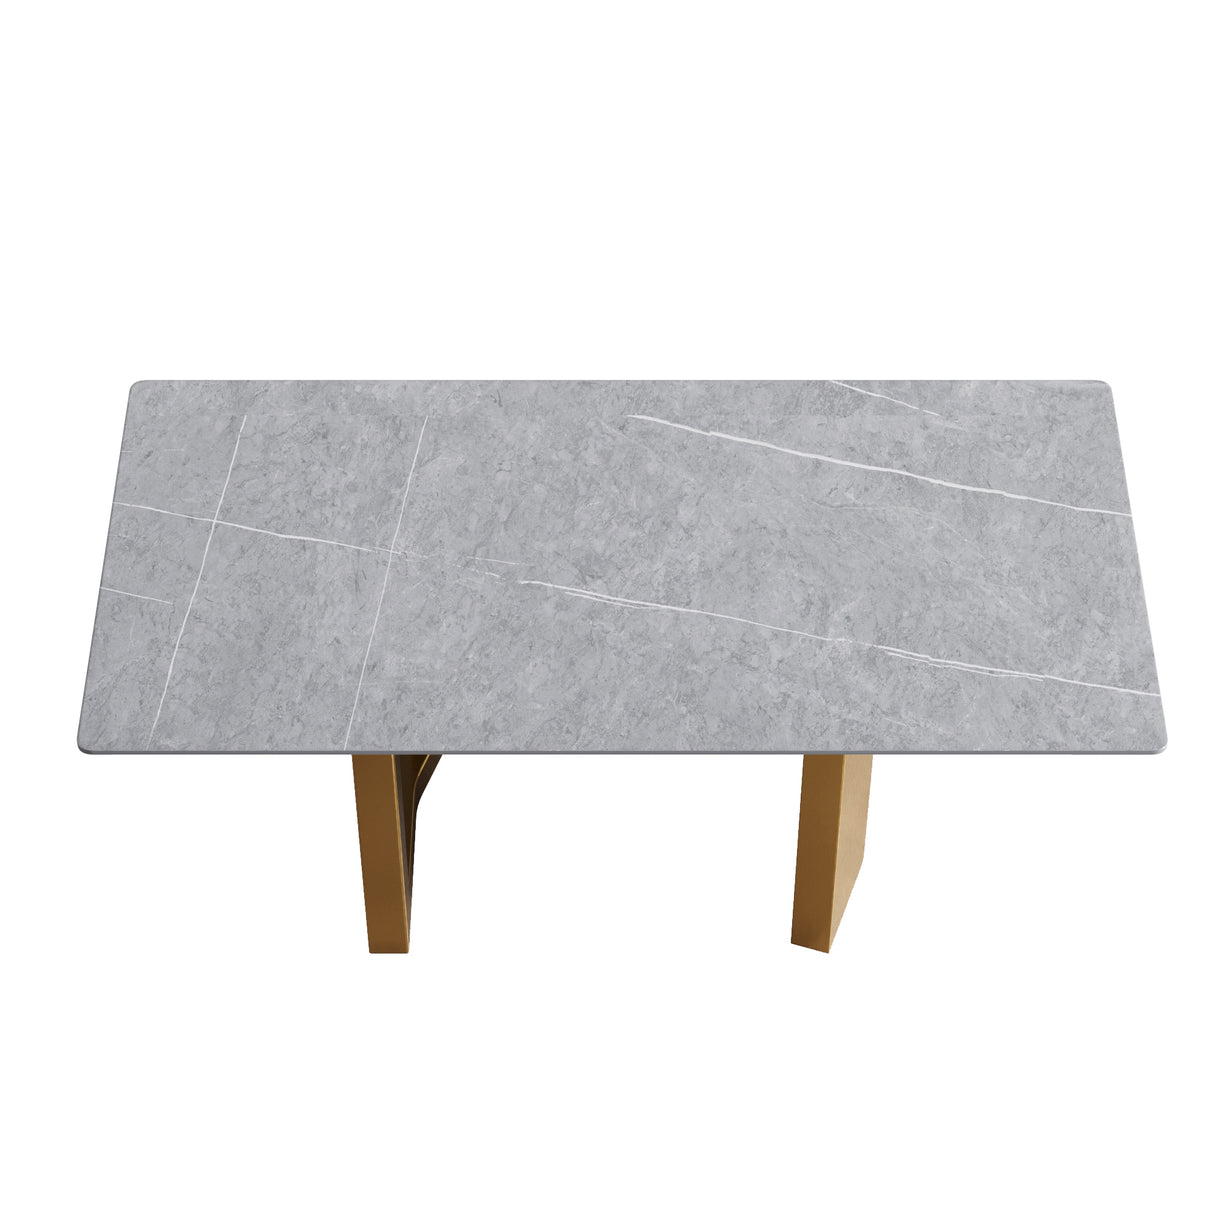 70.87" modern artificial stone gray straight edge golden metal leg dining table-can accommodate 6-8 people - Home Elegance USA